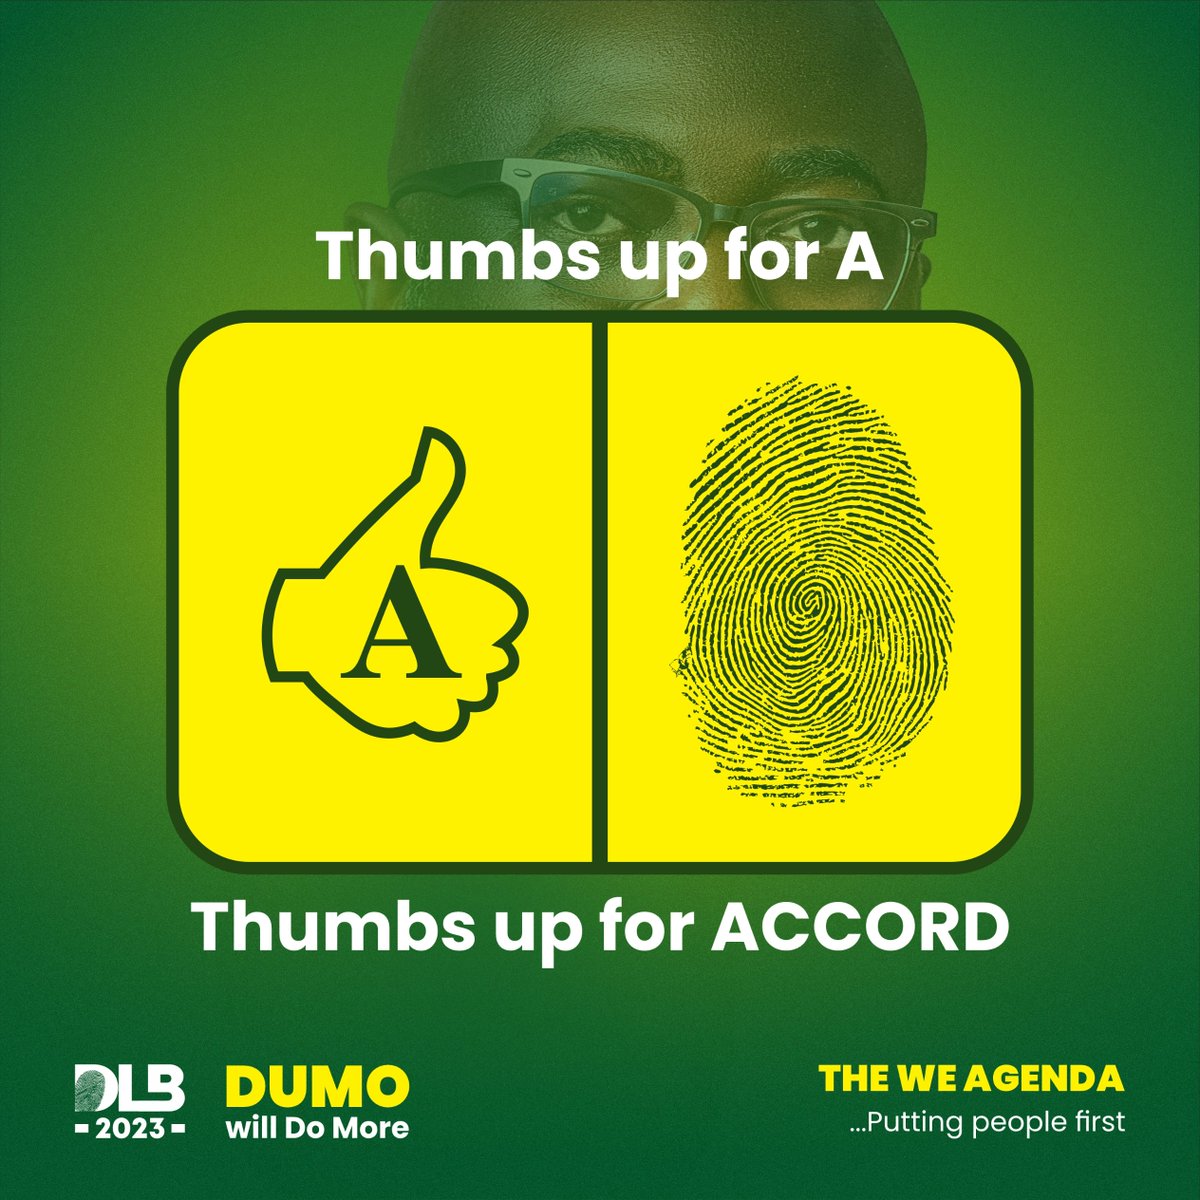 Rivers people, it's time to decide and vote ACCORDingly for good governance and accountability.

Vote Dumo Lulu-Briggs for a better Rivers State.
VOTE ACCORD 👍

Marked as the letter 'A' with a thumbs-up, the first party on the ballot paper.

#Dumowilldomore
#RiversState2023